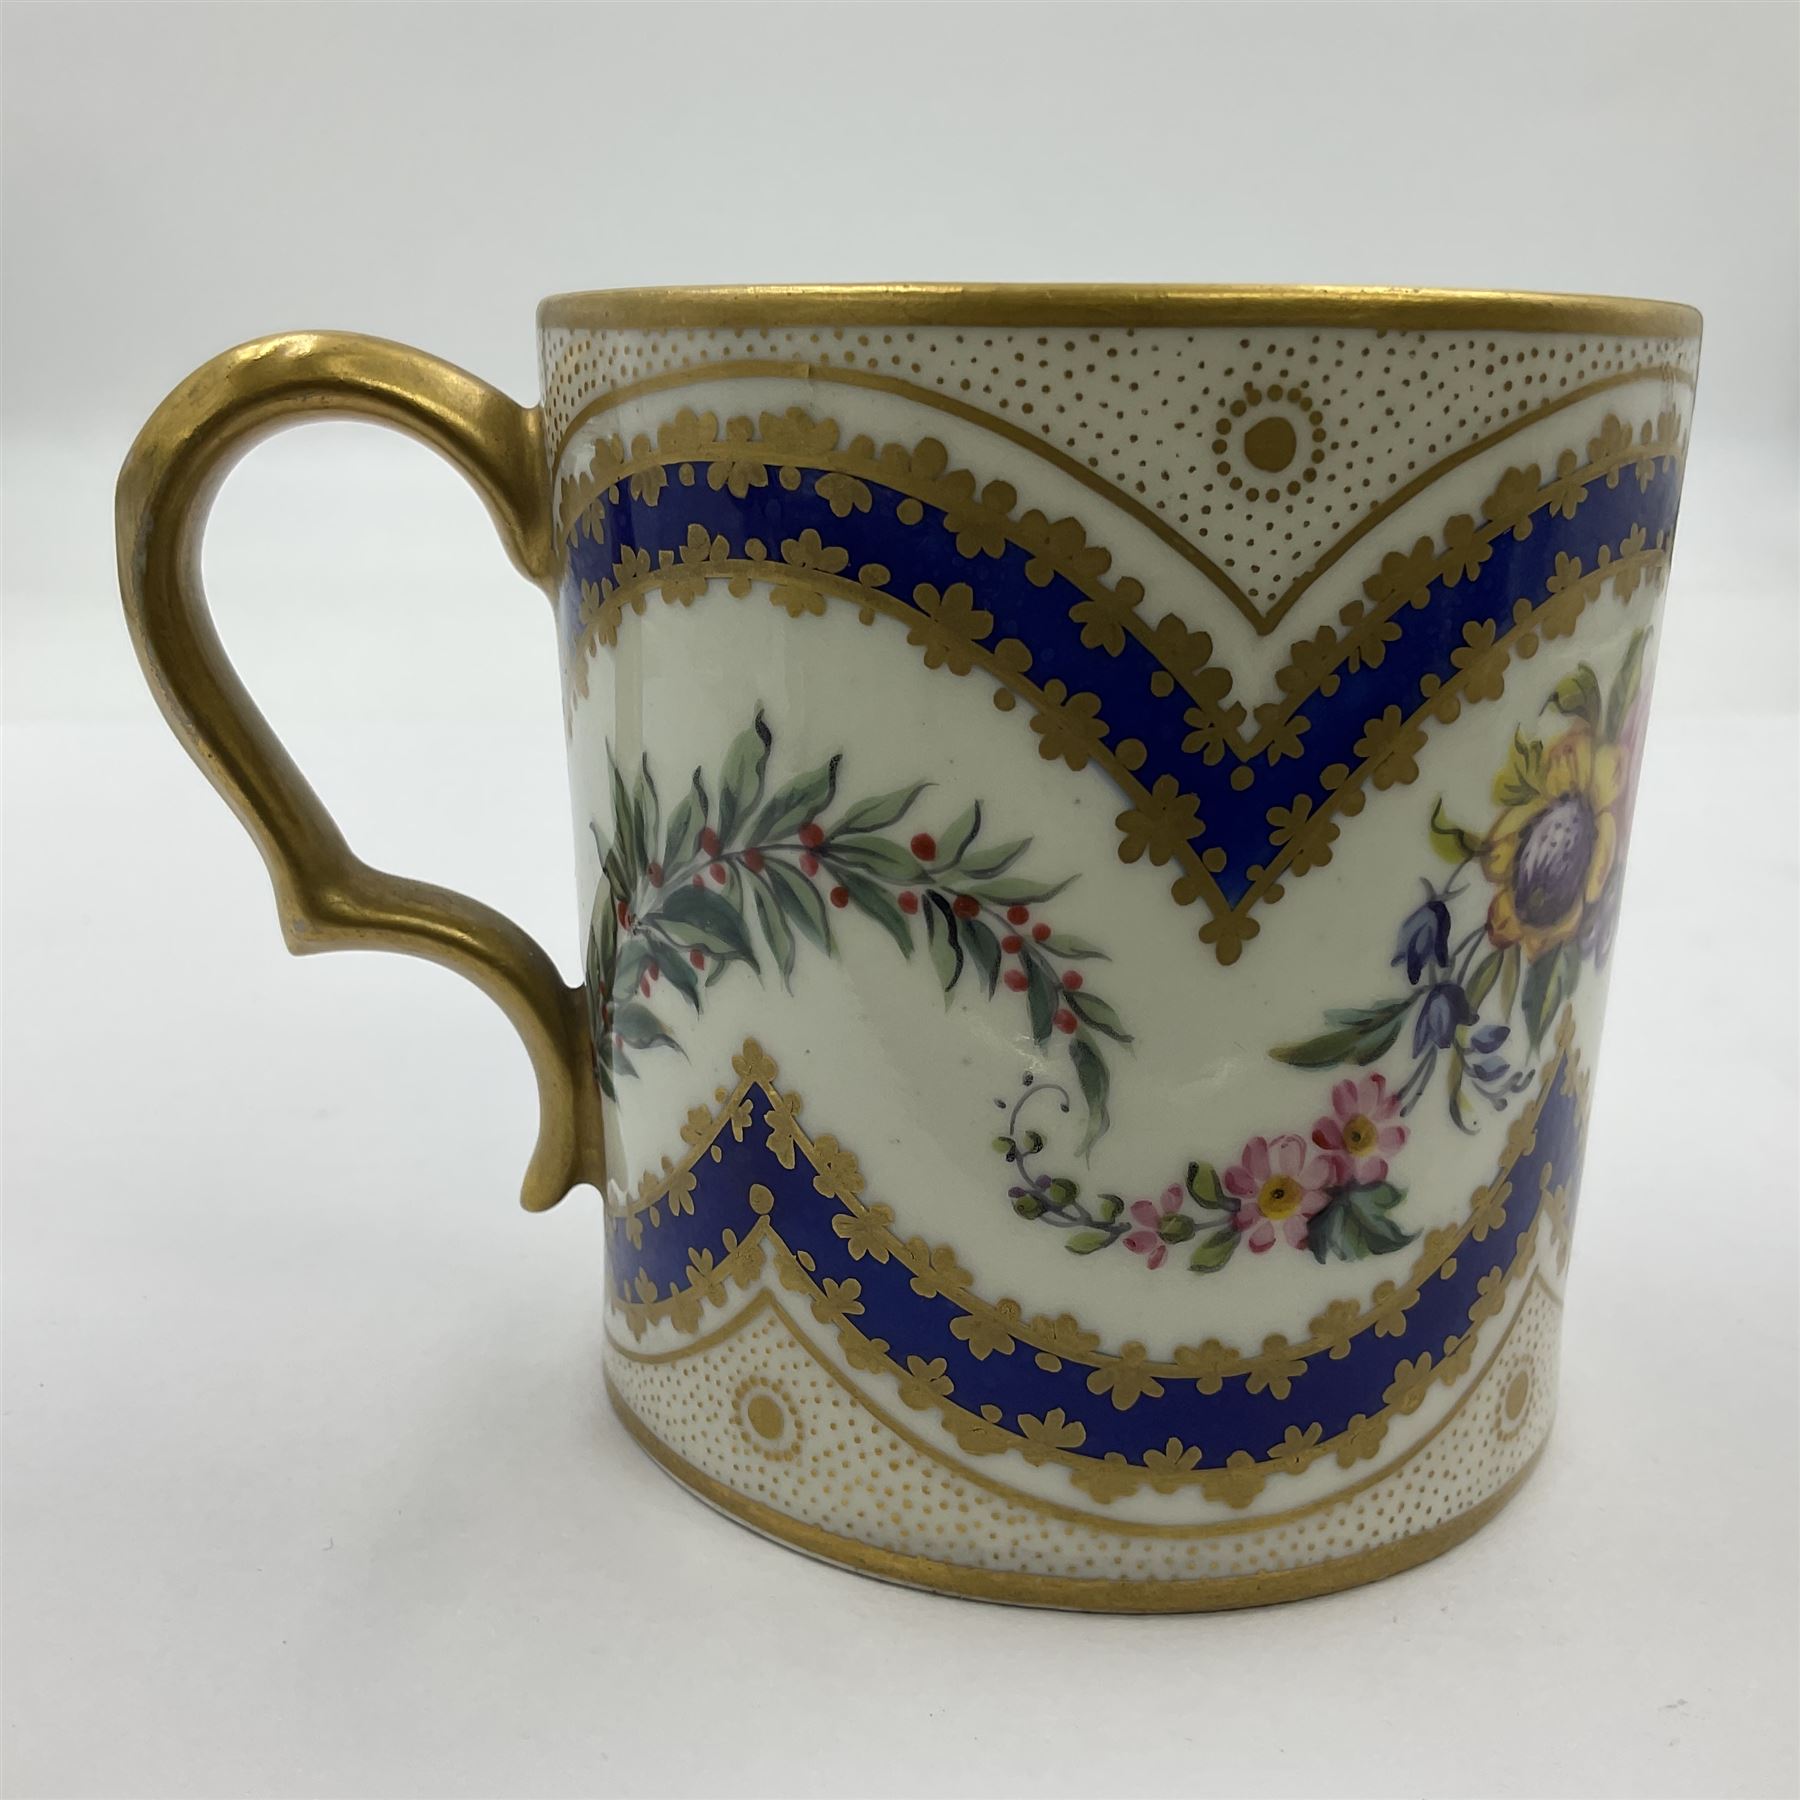 Sevres soft paste porcelain coffee can and saucer with date code for 1767 - Image 12 of 16